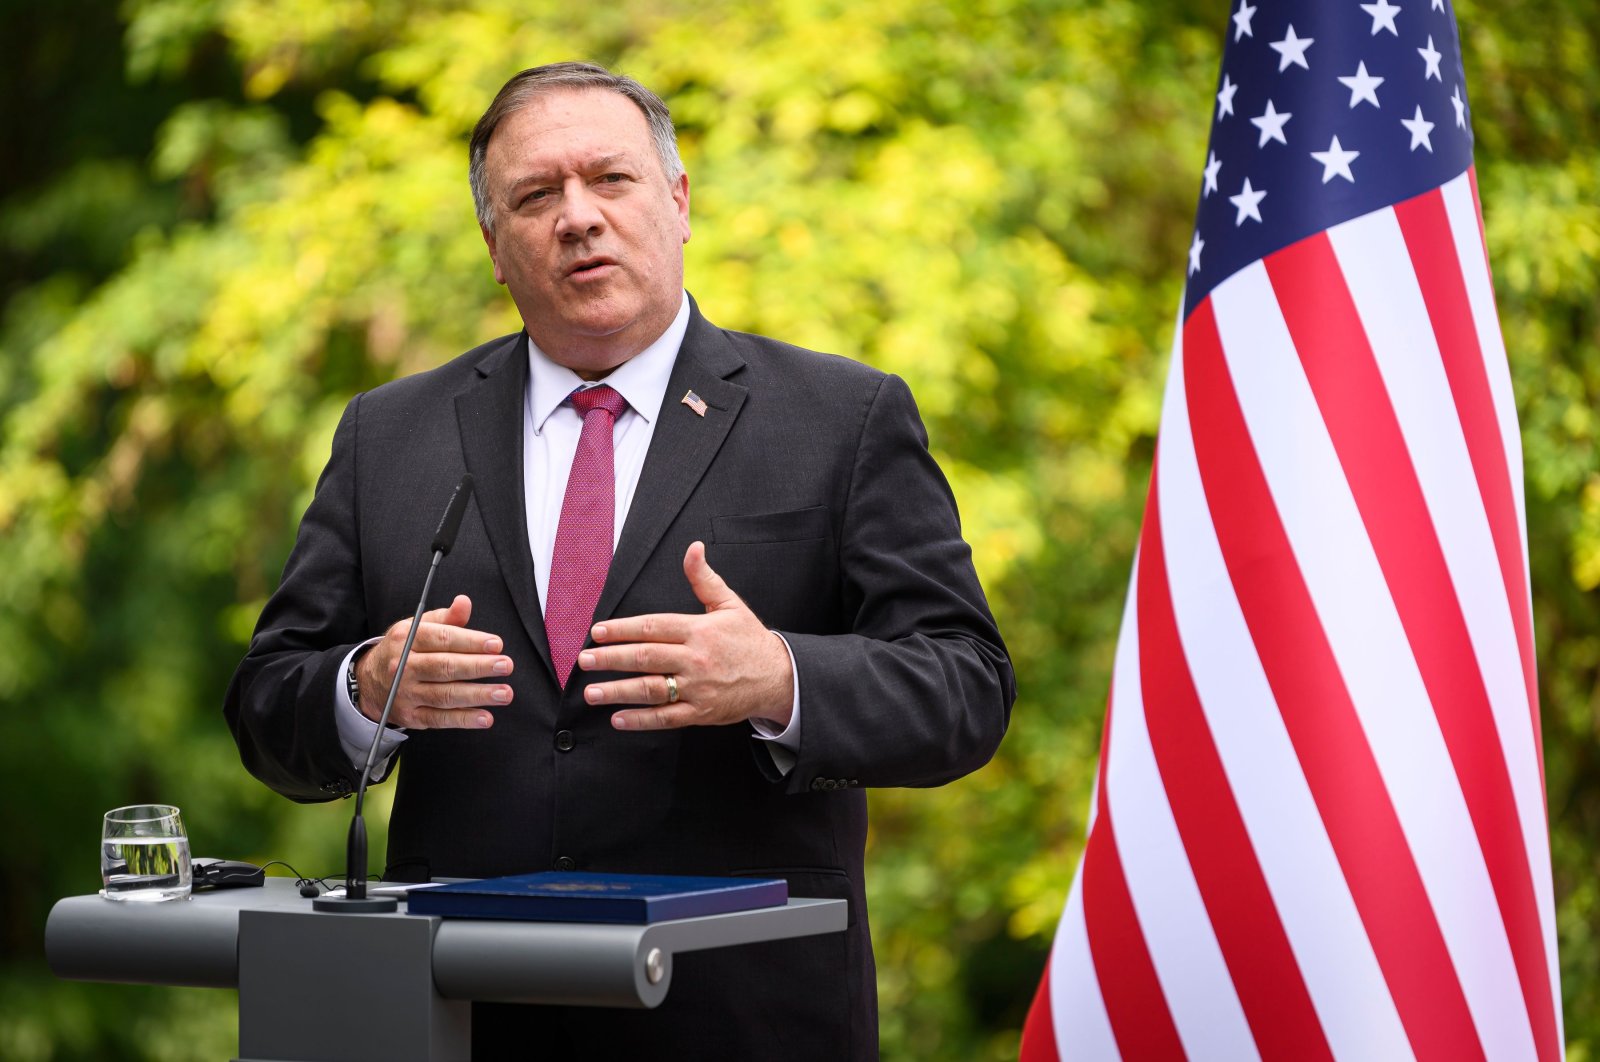 U.S. Secretary of State Mike Pompeo (L) gestures during a press conference in Bled, Slovenia, Aug. 13, 2020. (AFP Photo)